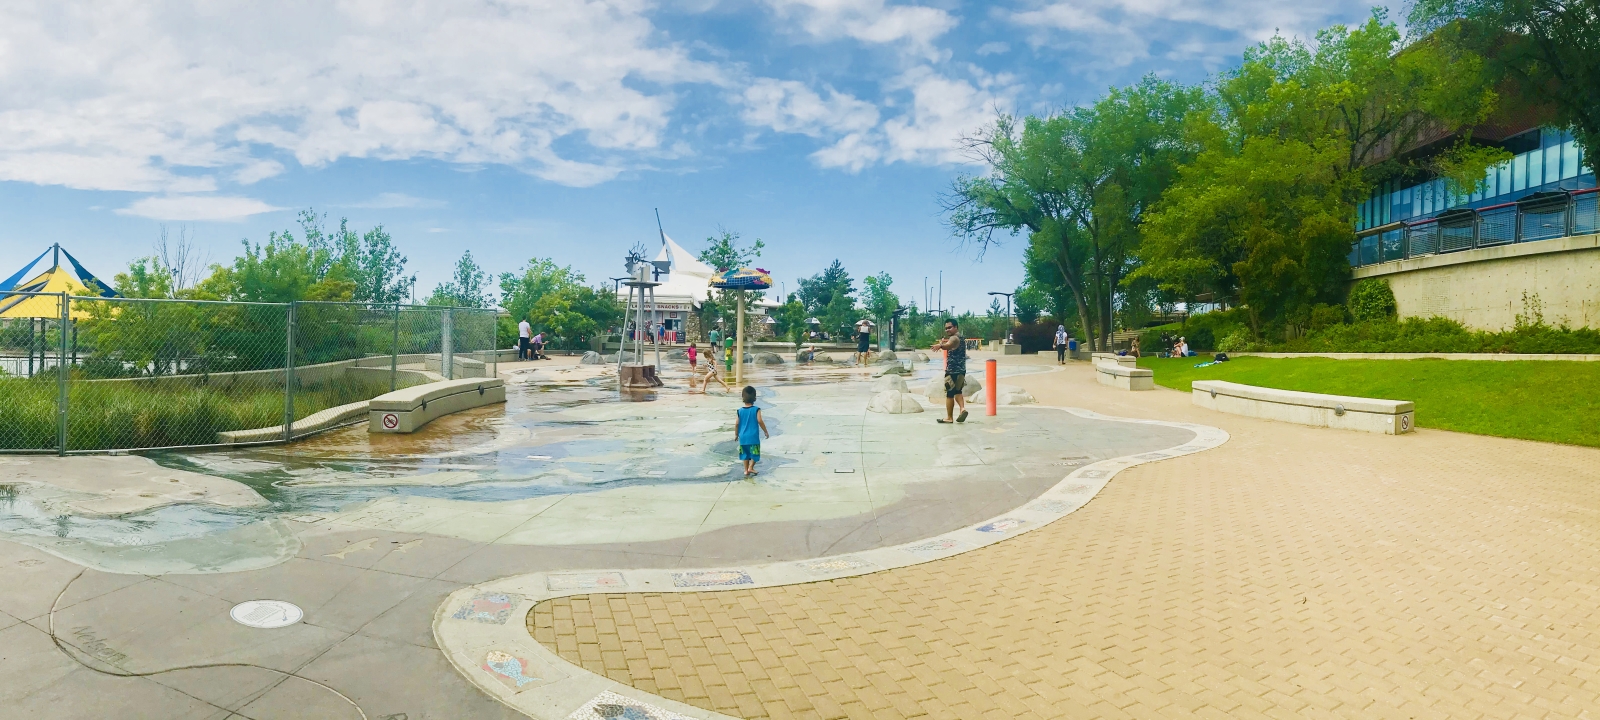 Splashing Our Way Through Summer: A Saskatoon Guide to Some of the Best Spray Pads